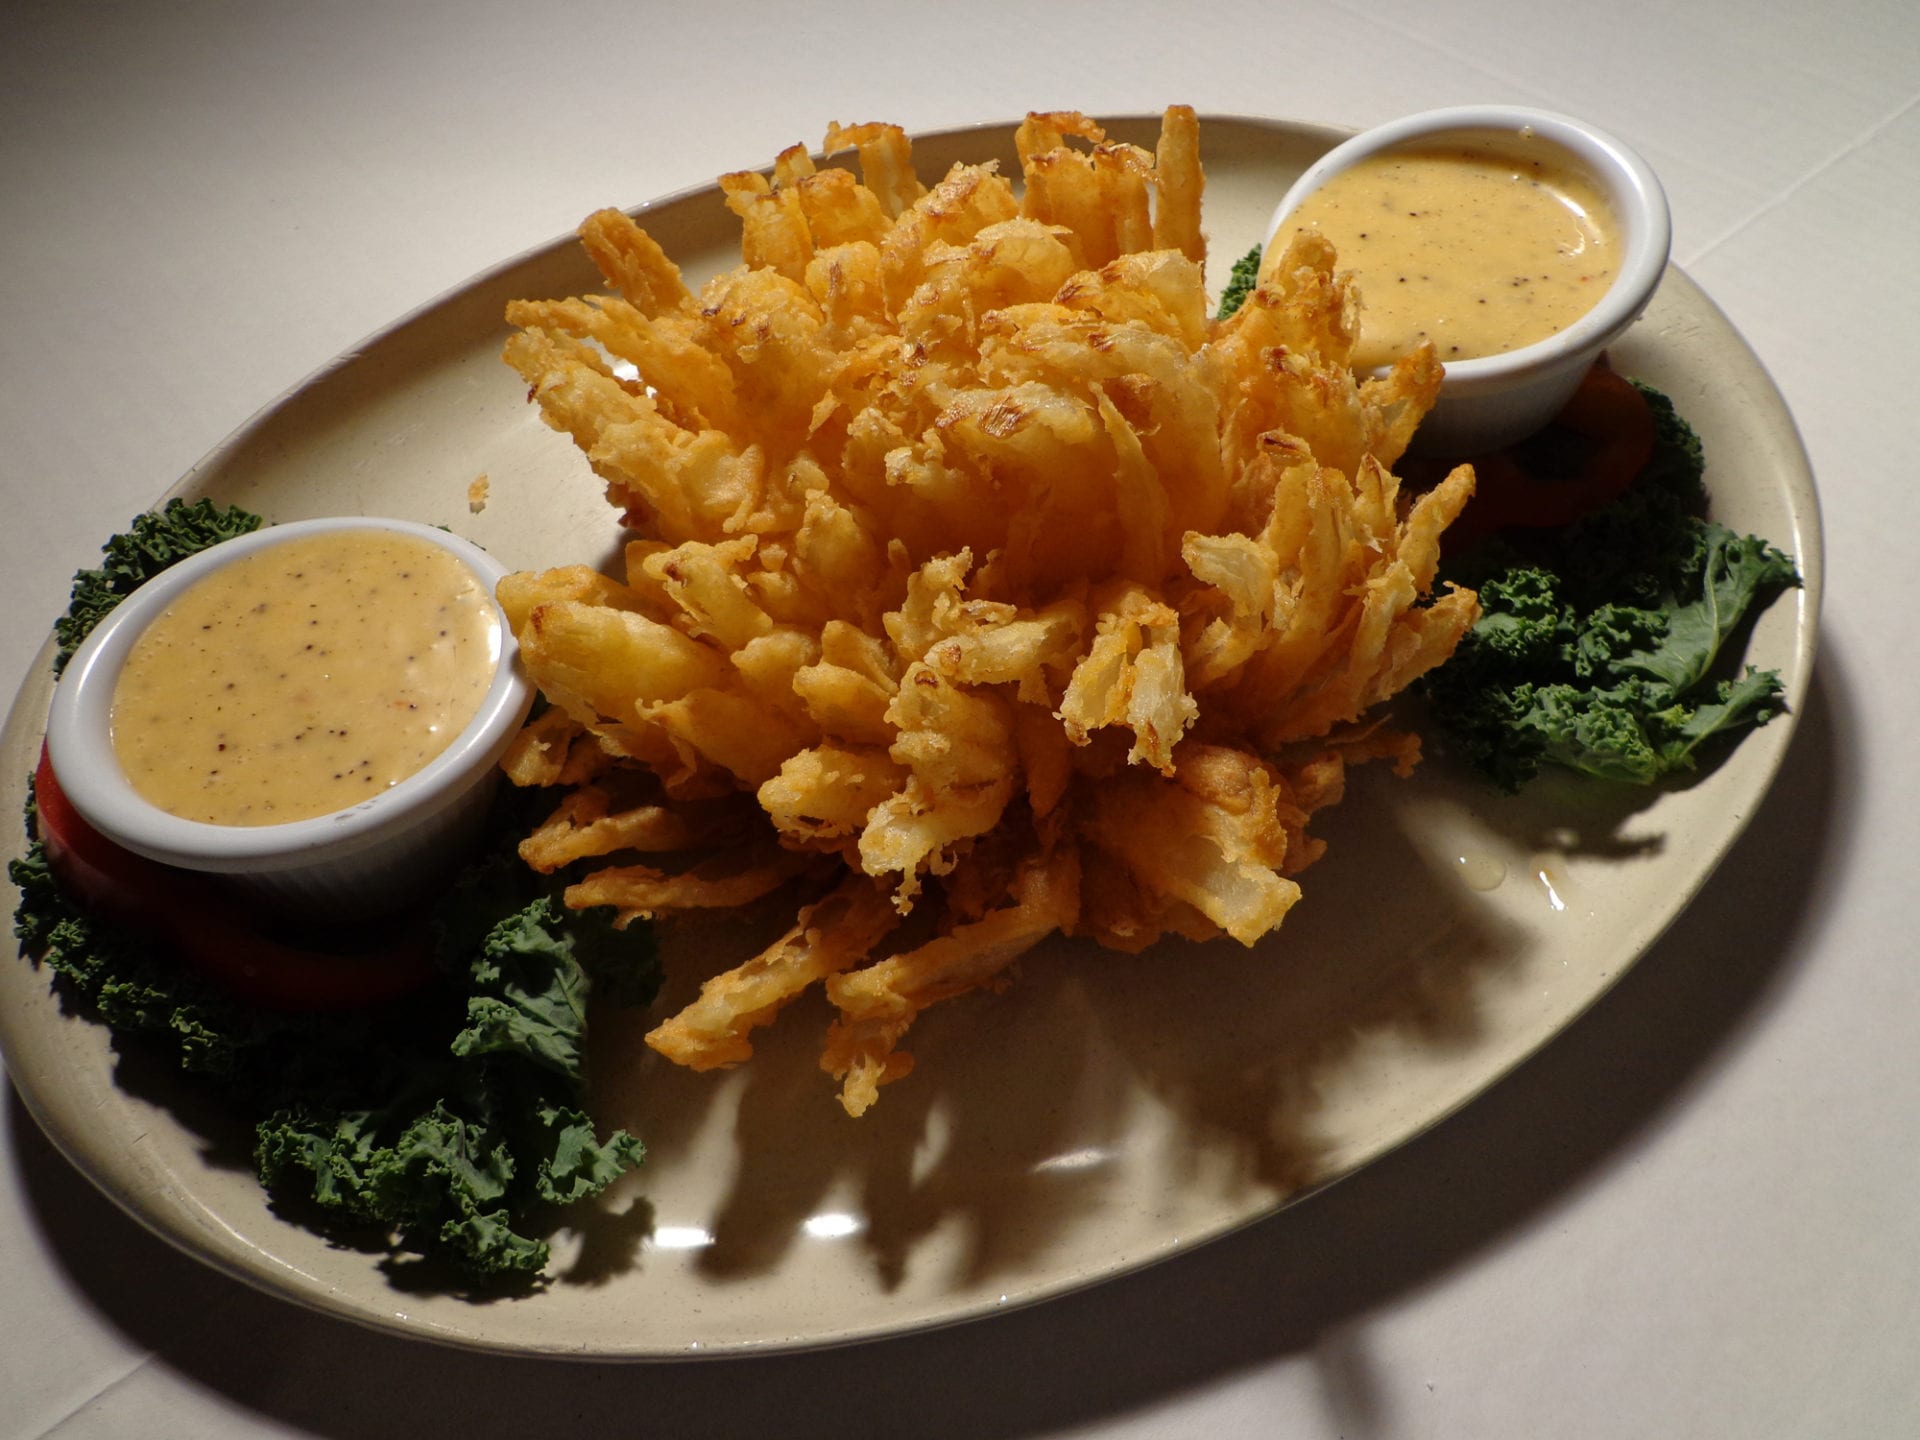 A Blooming Onion With Sauce Dips